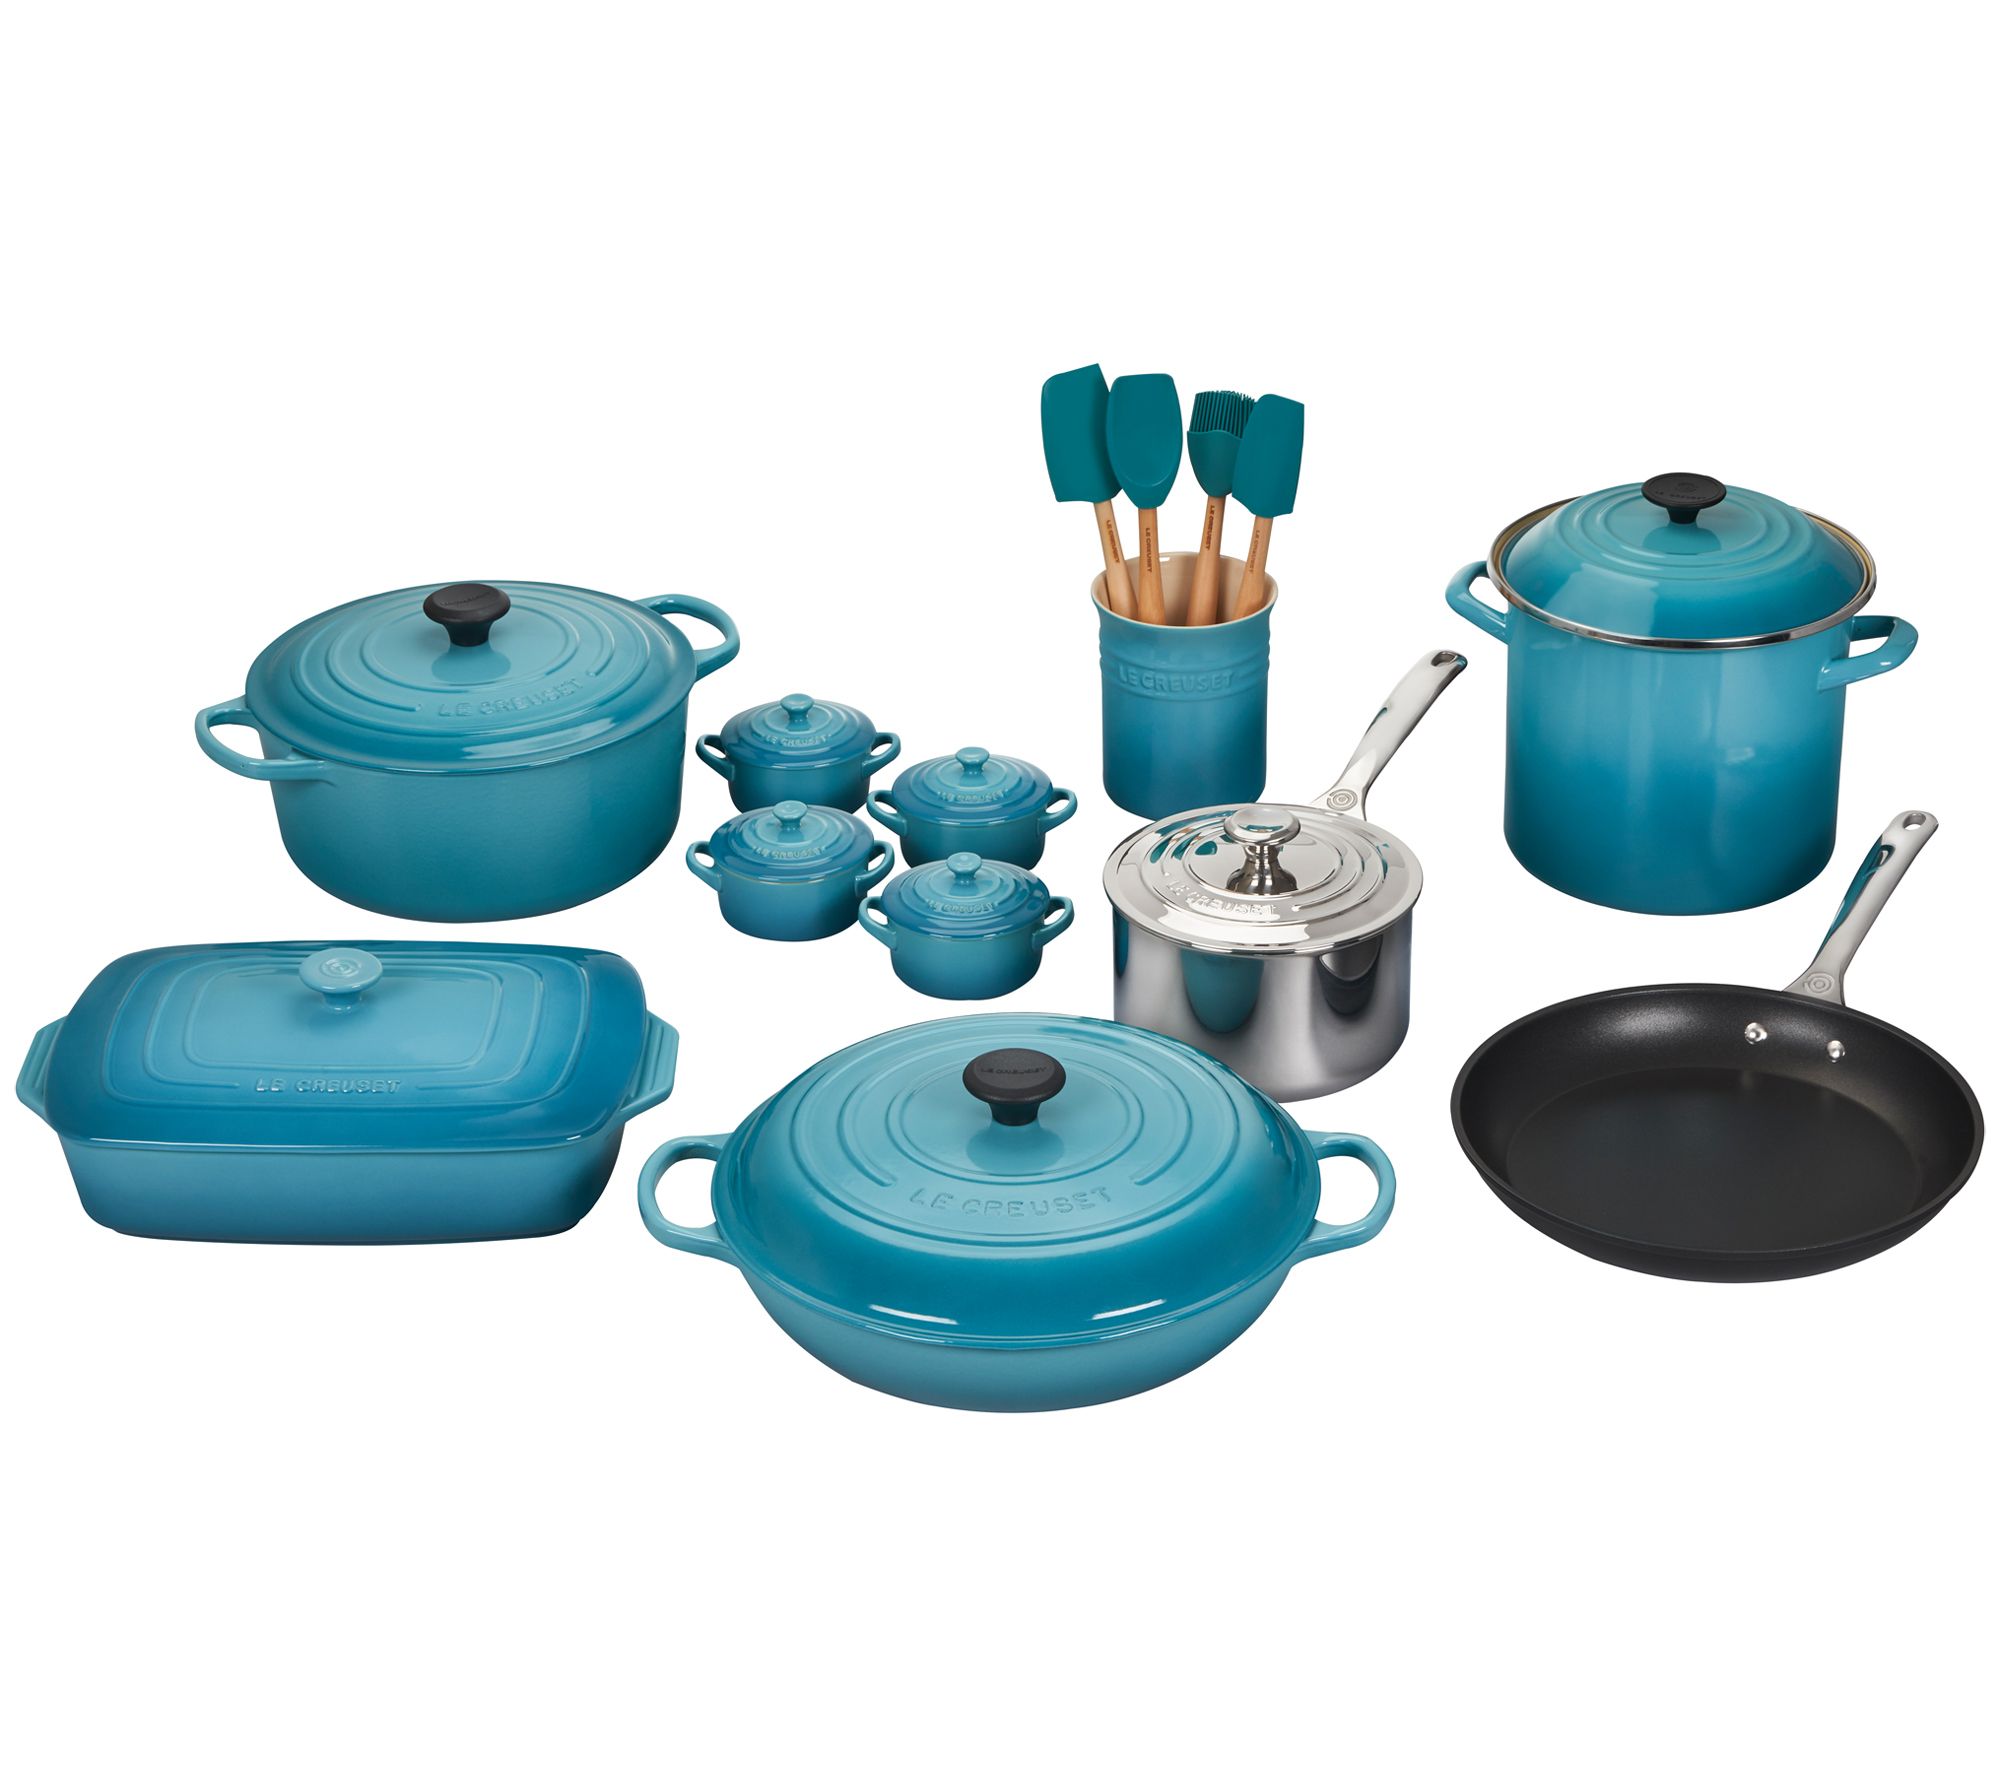 QVC sale: Save on KitchenAid, Caraway Home, Le Creuset, and more - Reviewed